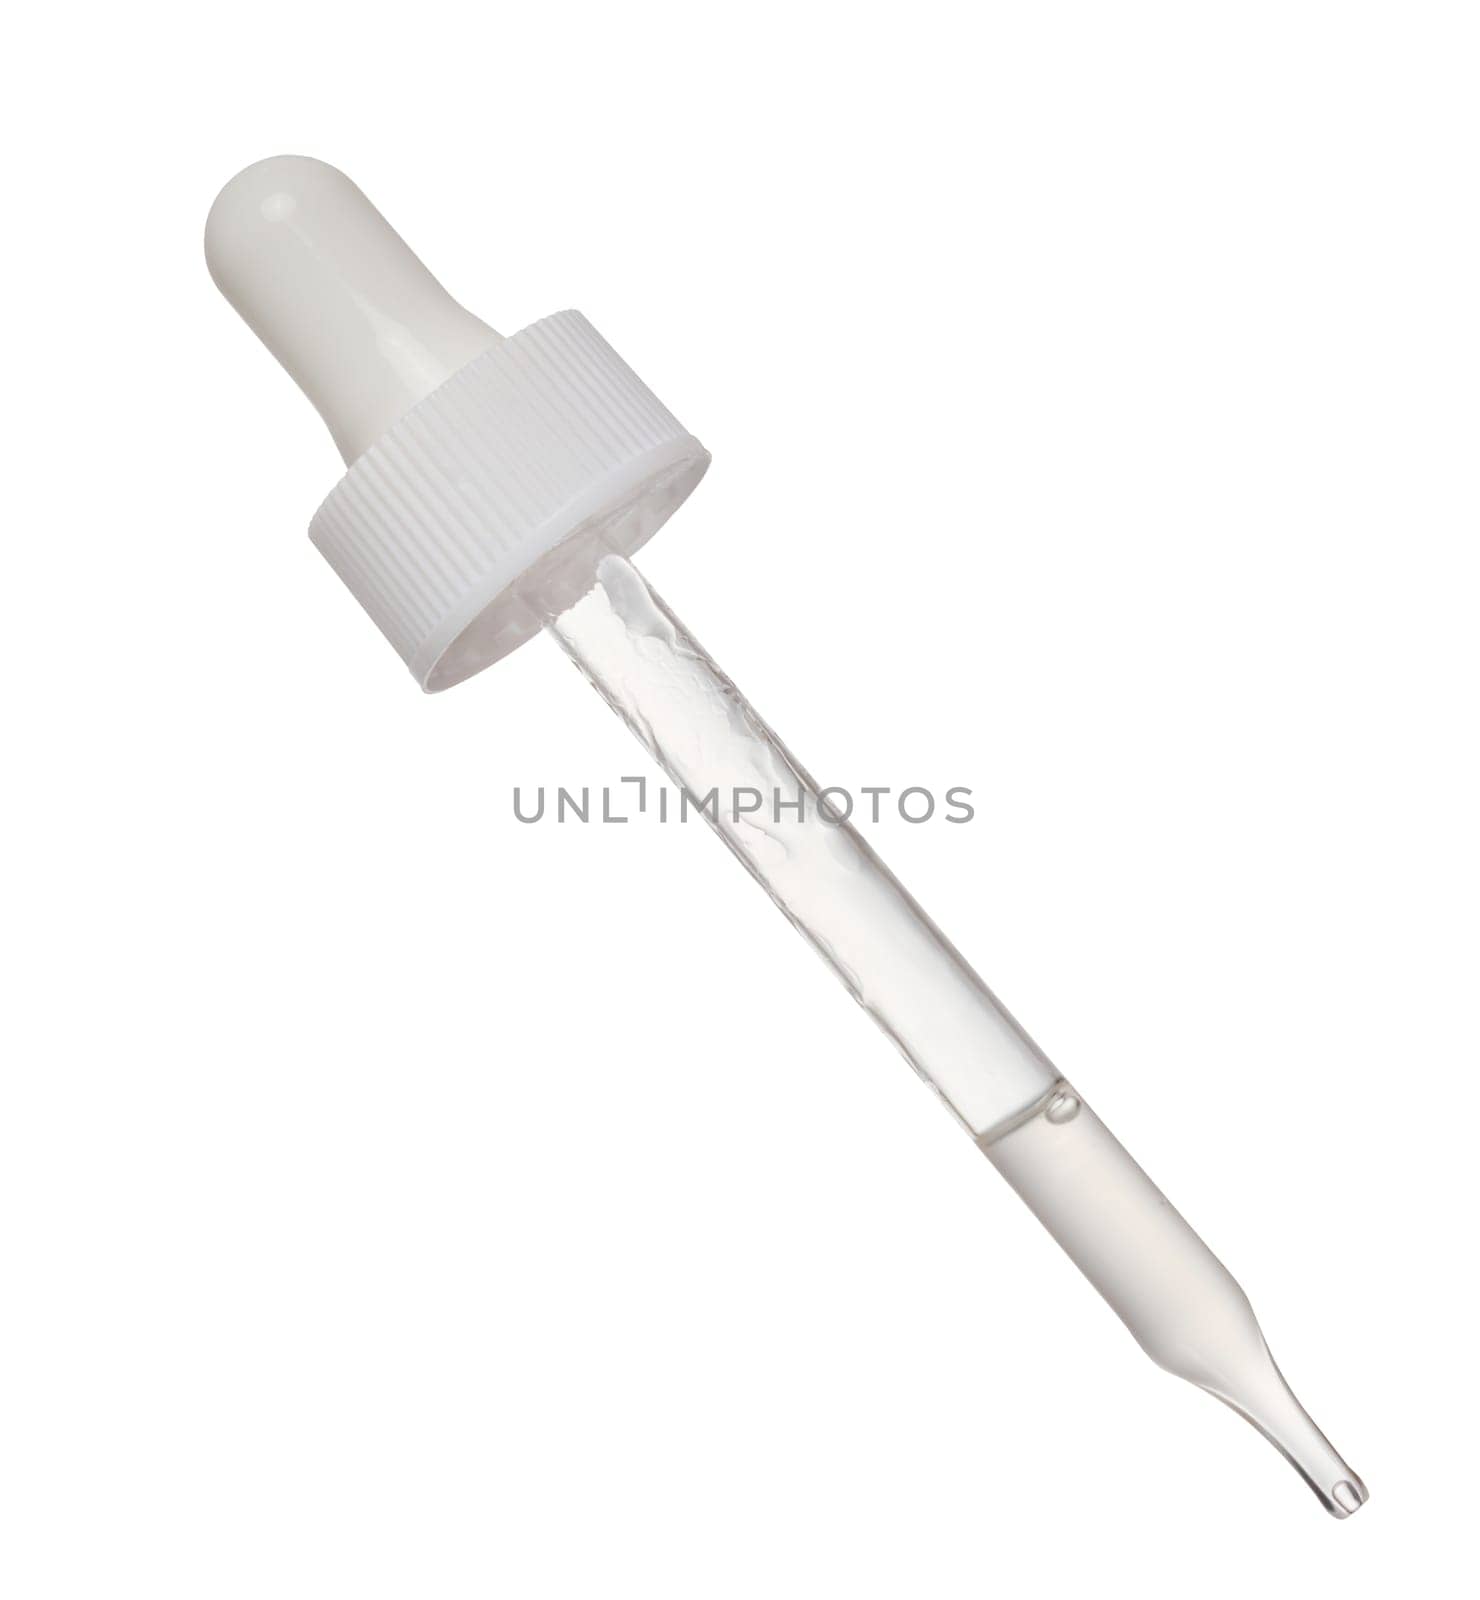 Transparent glass pipette with white liquid on isolated background by ndanko